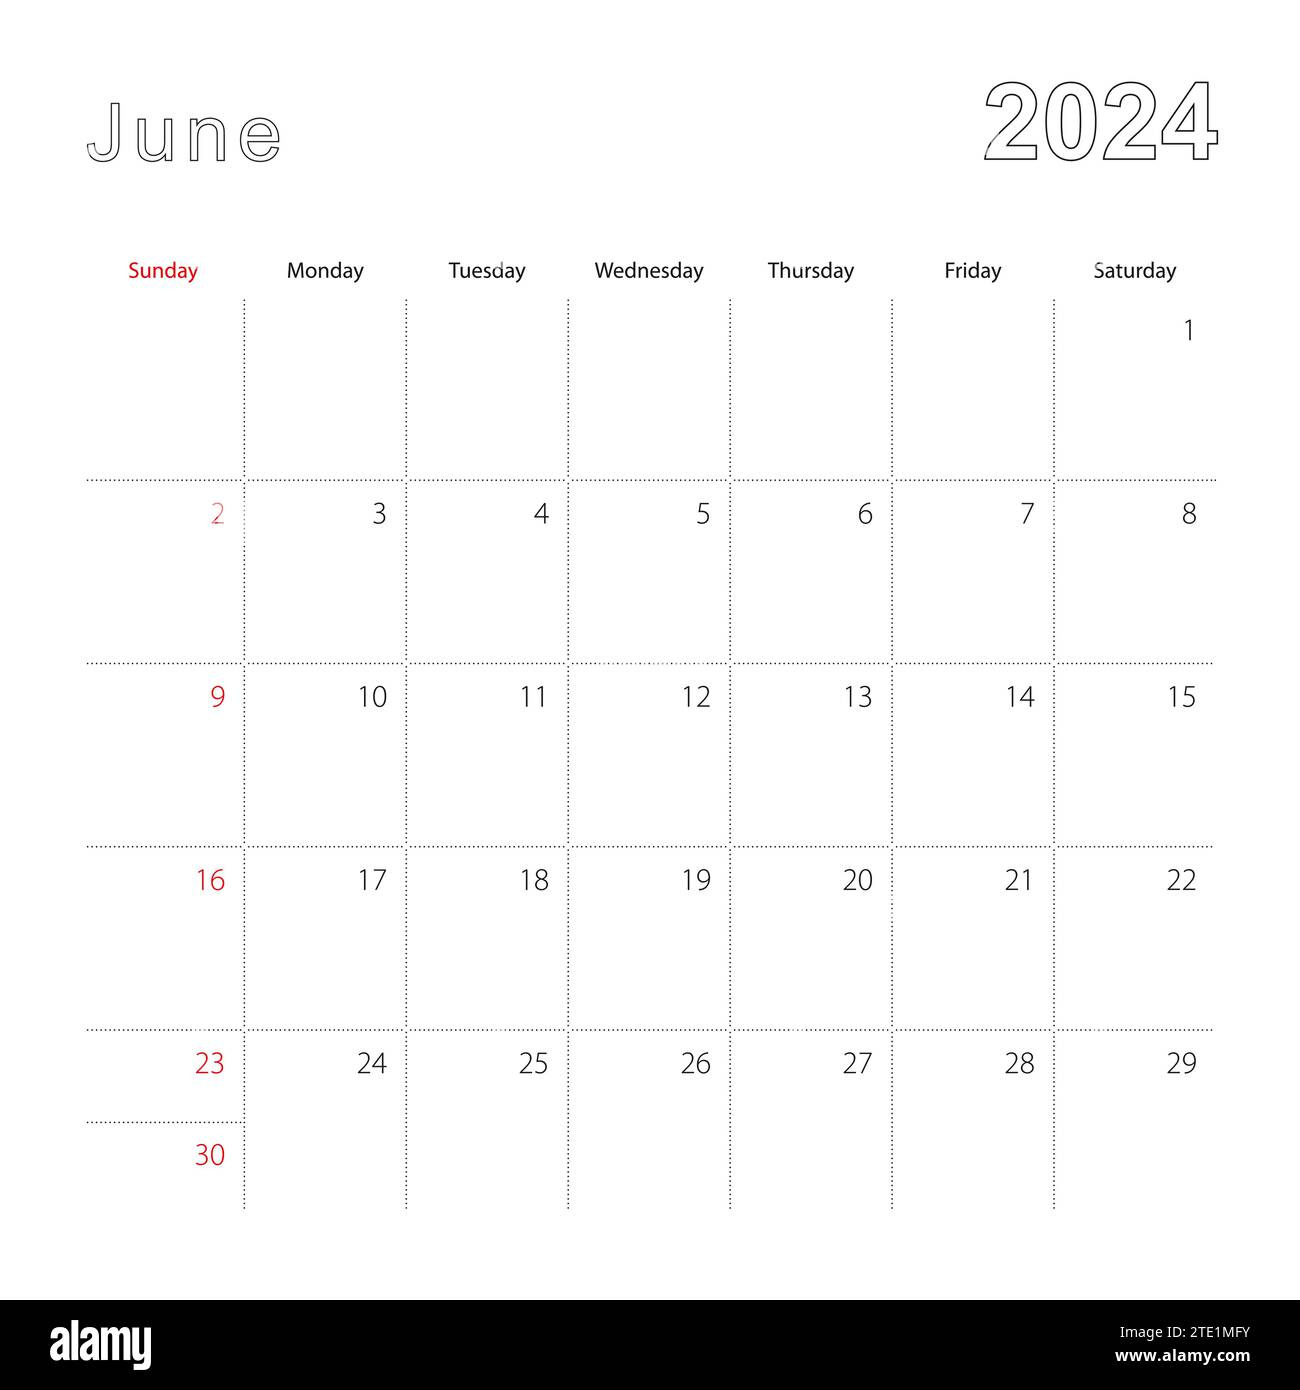 Simple Wall Calendar For June 2024 With Dotted Lines. The Calendar with June Calendar 2024 With Lines